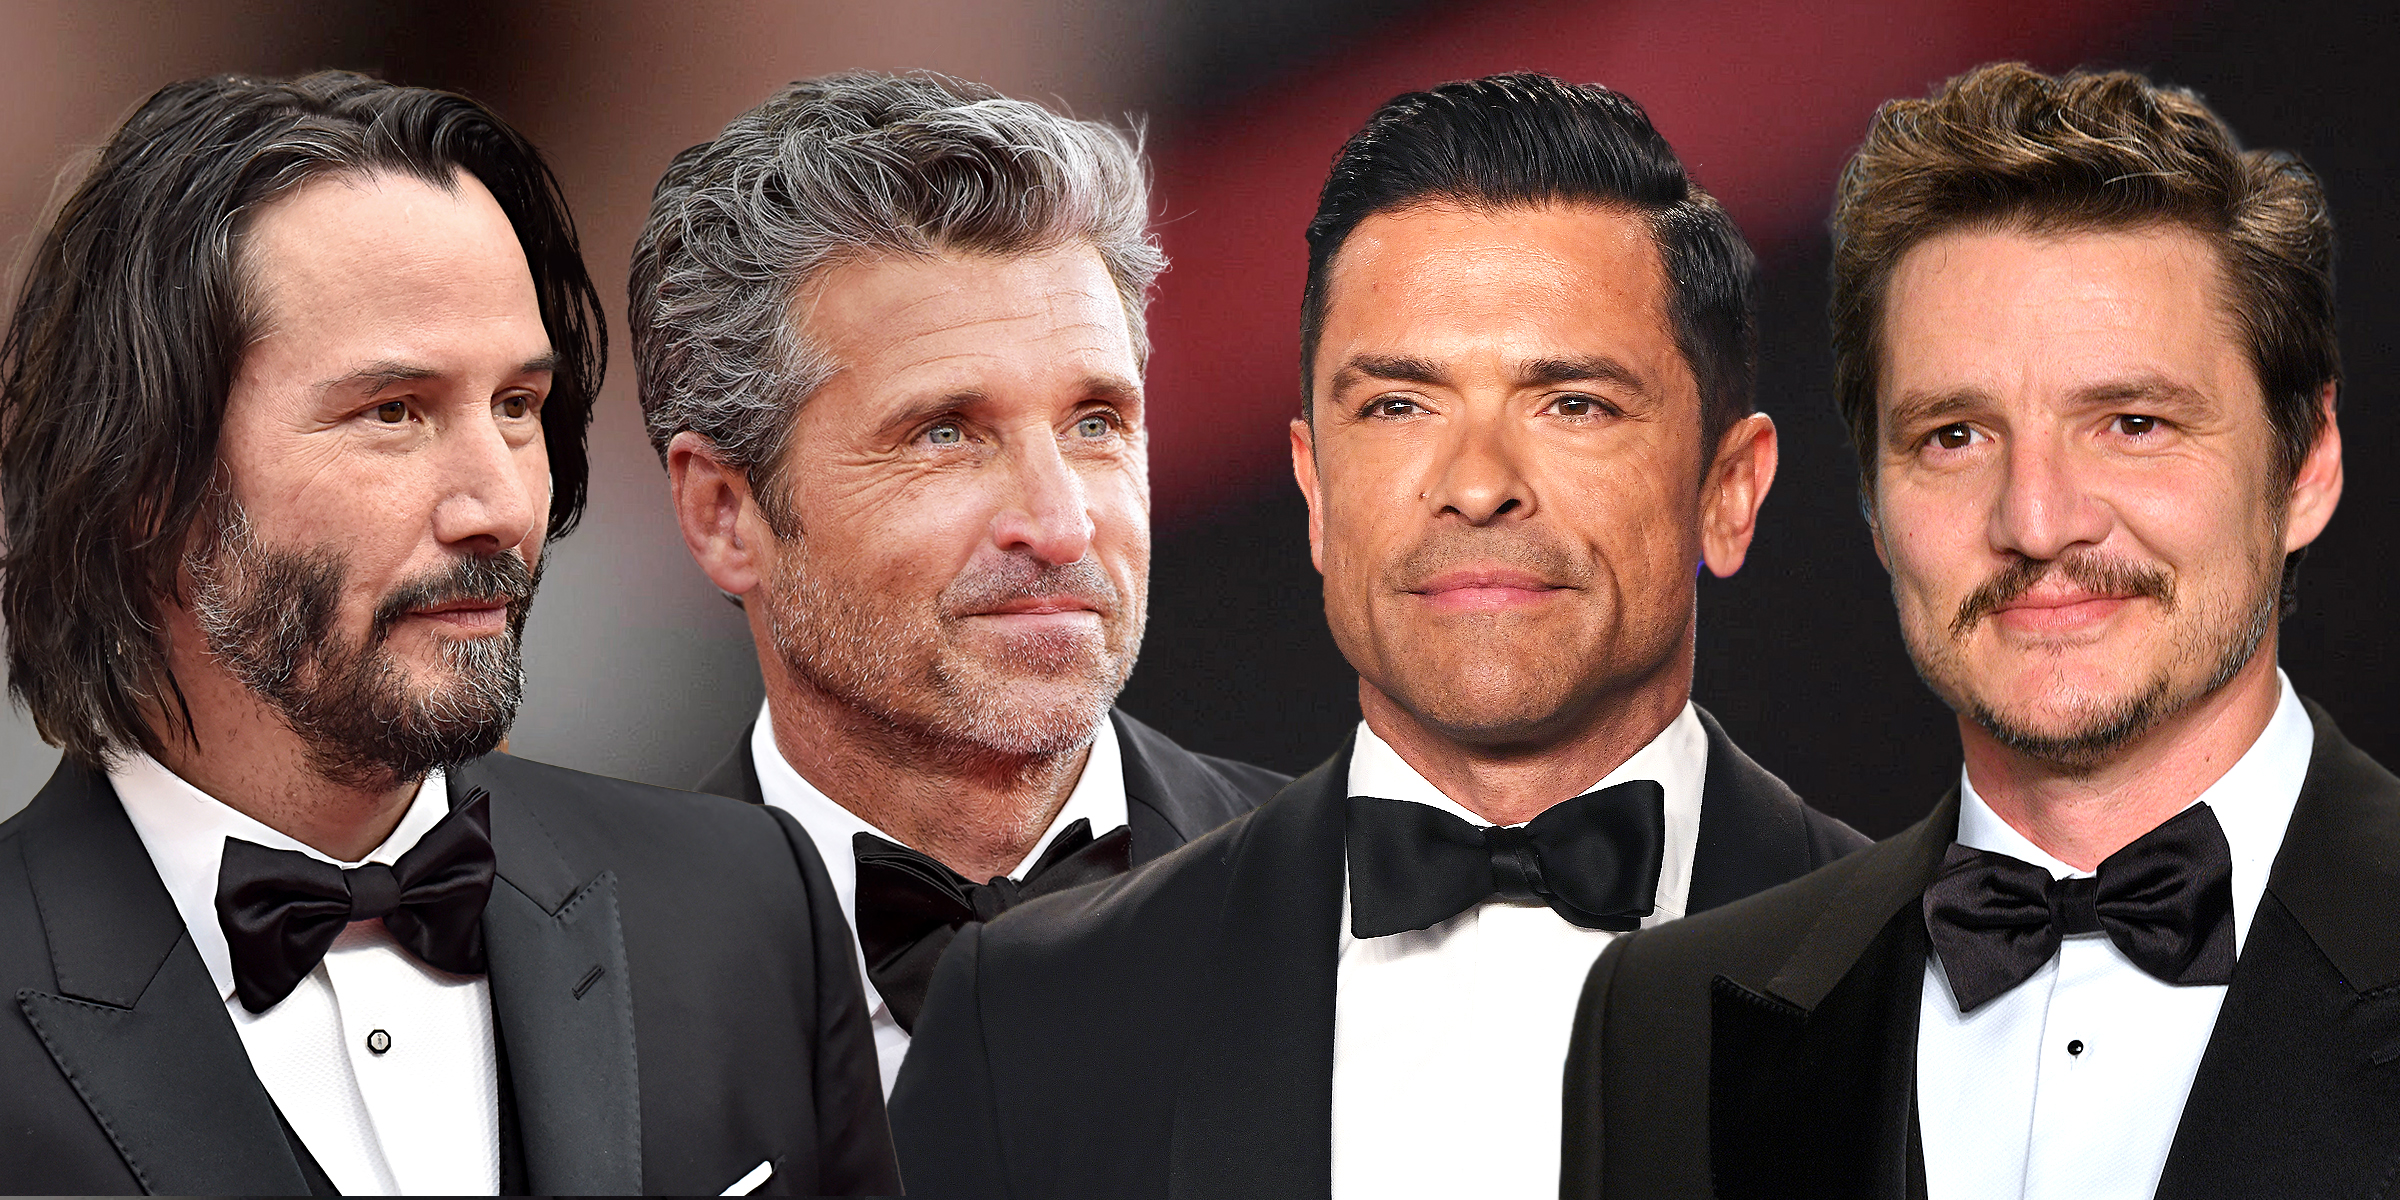 Keanu Reeves, Patrick Dempsey, Mark Consuelos, and Pedro Pascal | Source: Getty Images